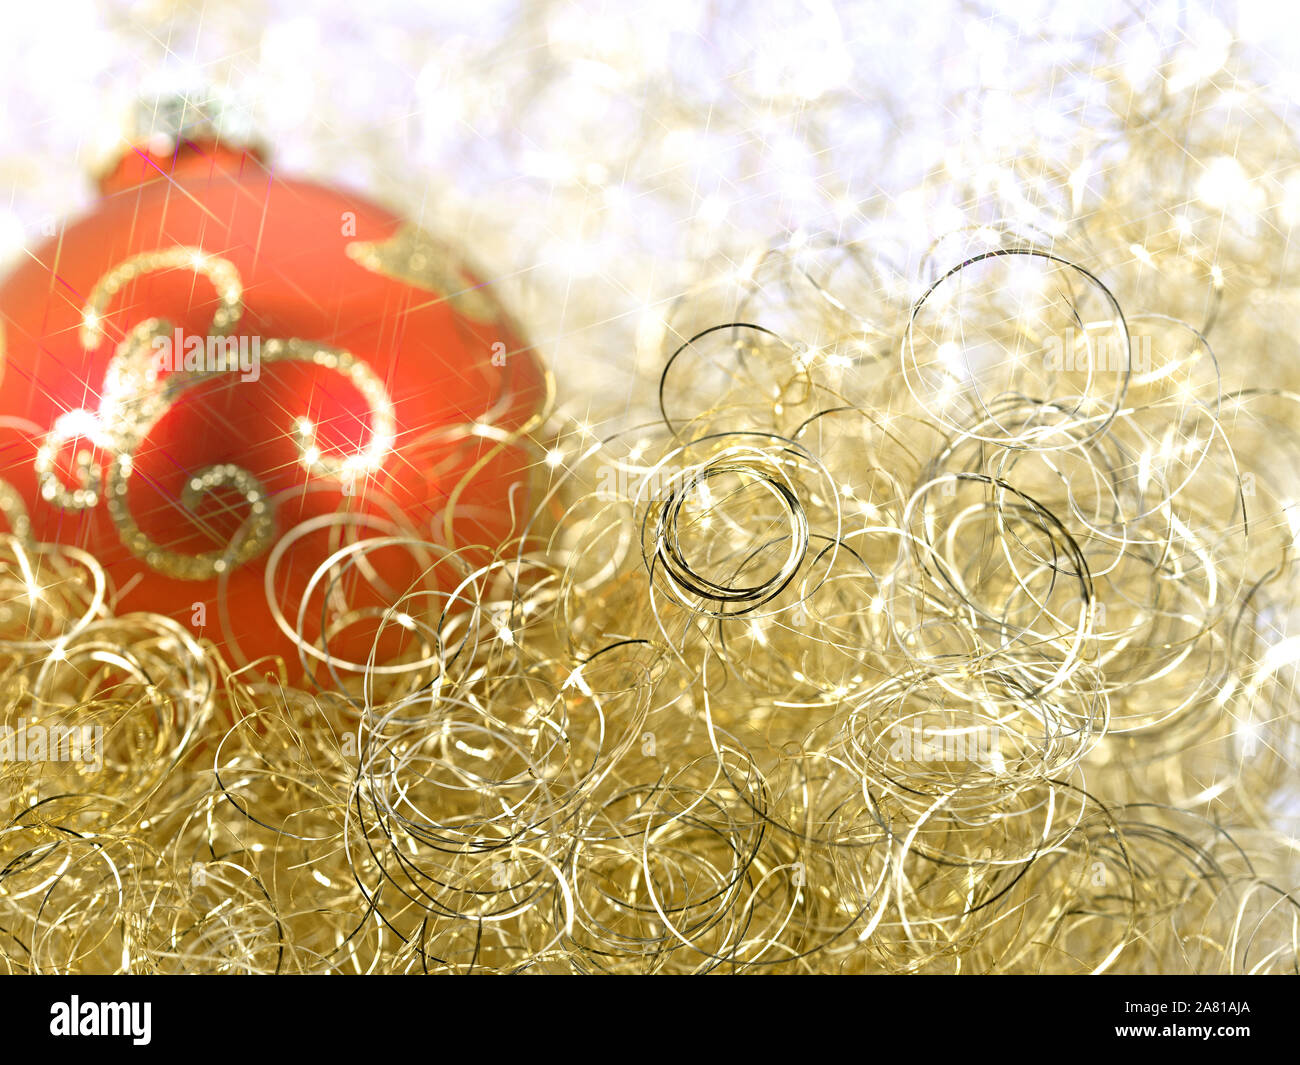 Golden Angel Hair And Red Christmas Tree Ball Stock Photo Alamy